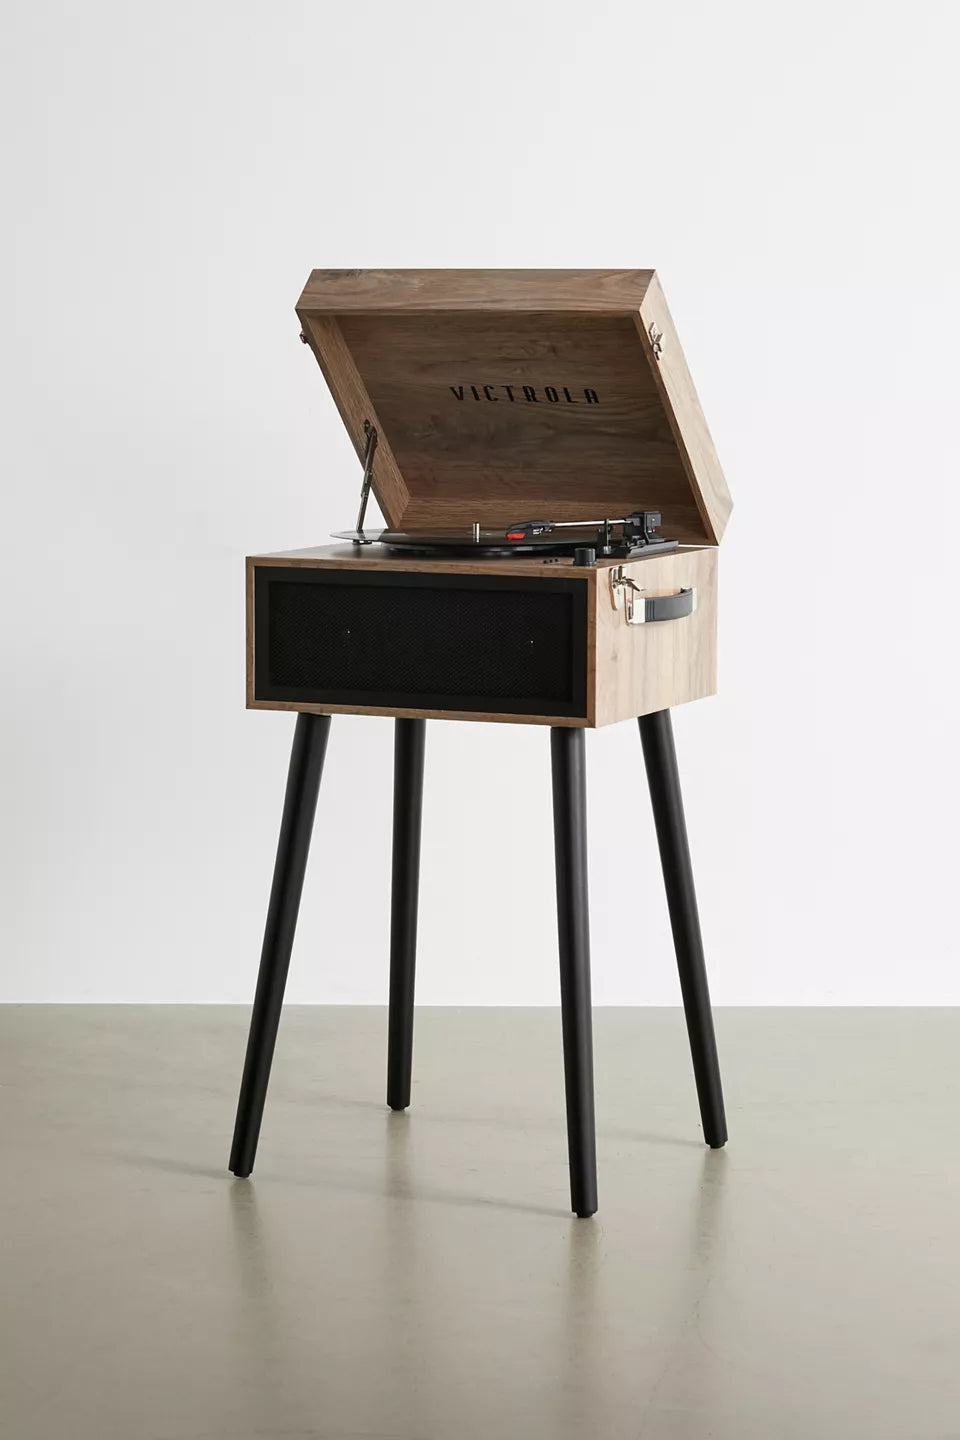 Victrola VTA-75-FOT  Record Player Liberty Bluetooth 5 in 1 Radio FM - Spin City Records